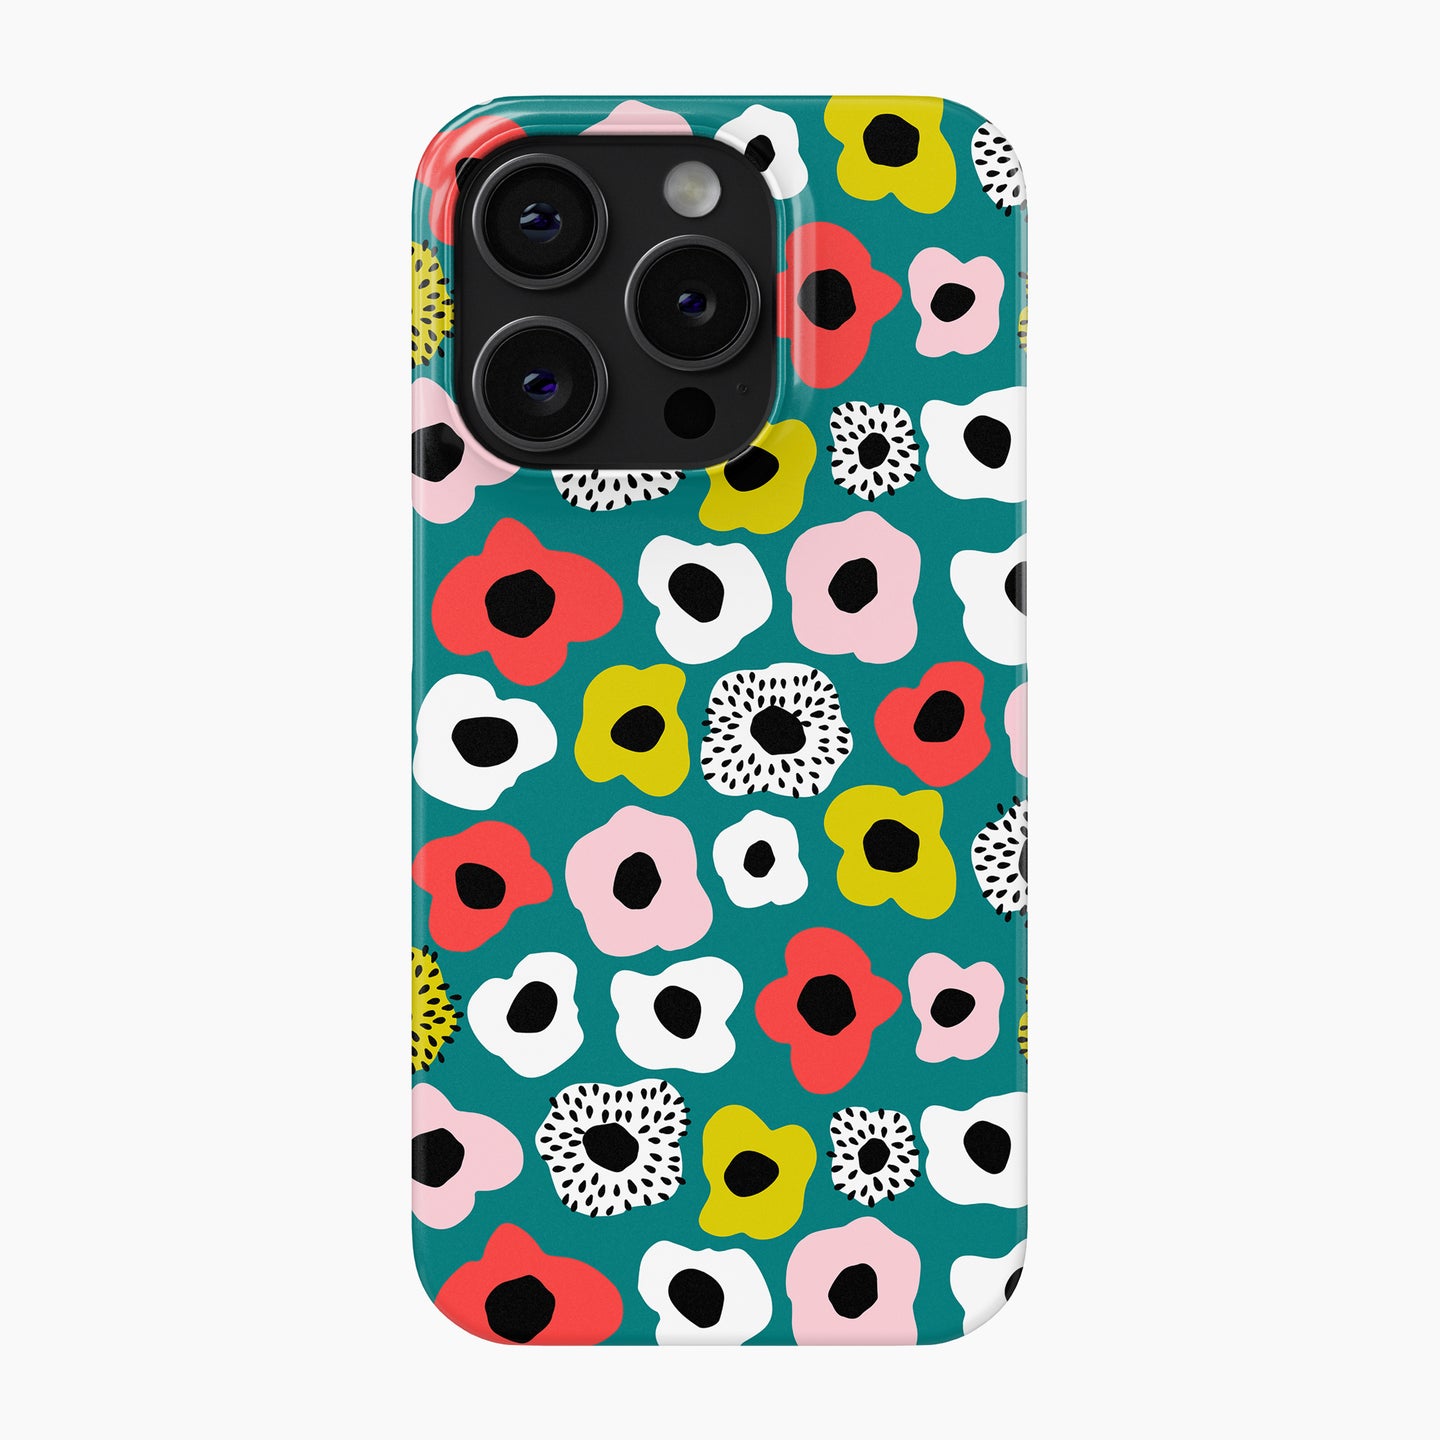 Poppin' - Snap Phone Case